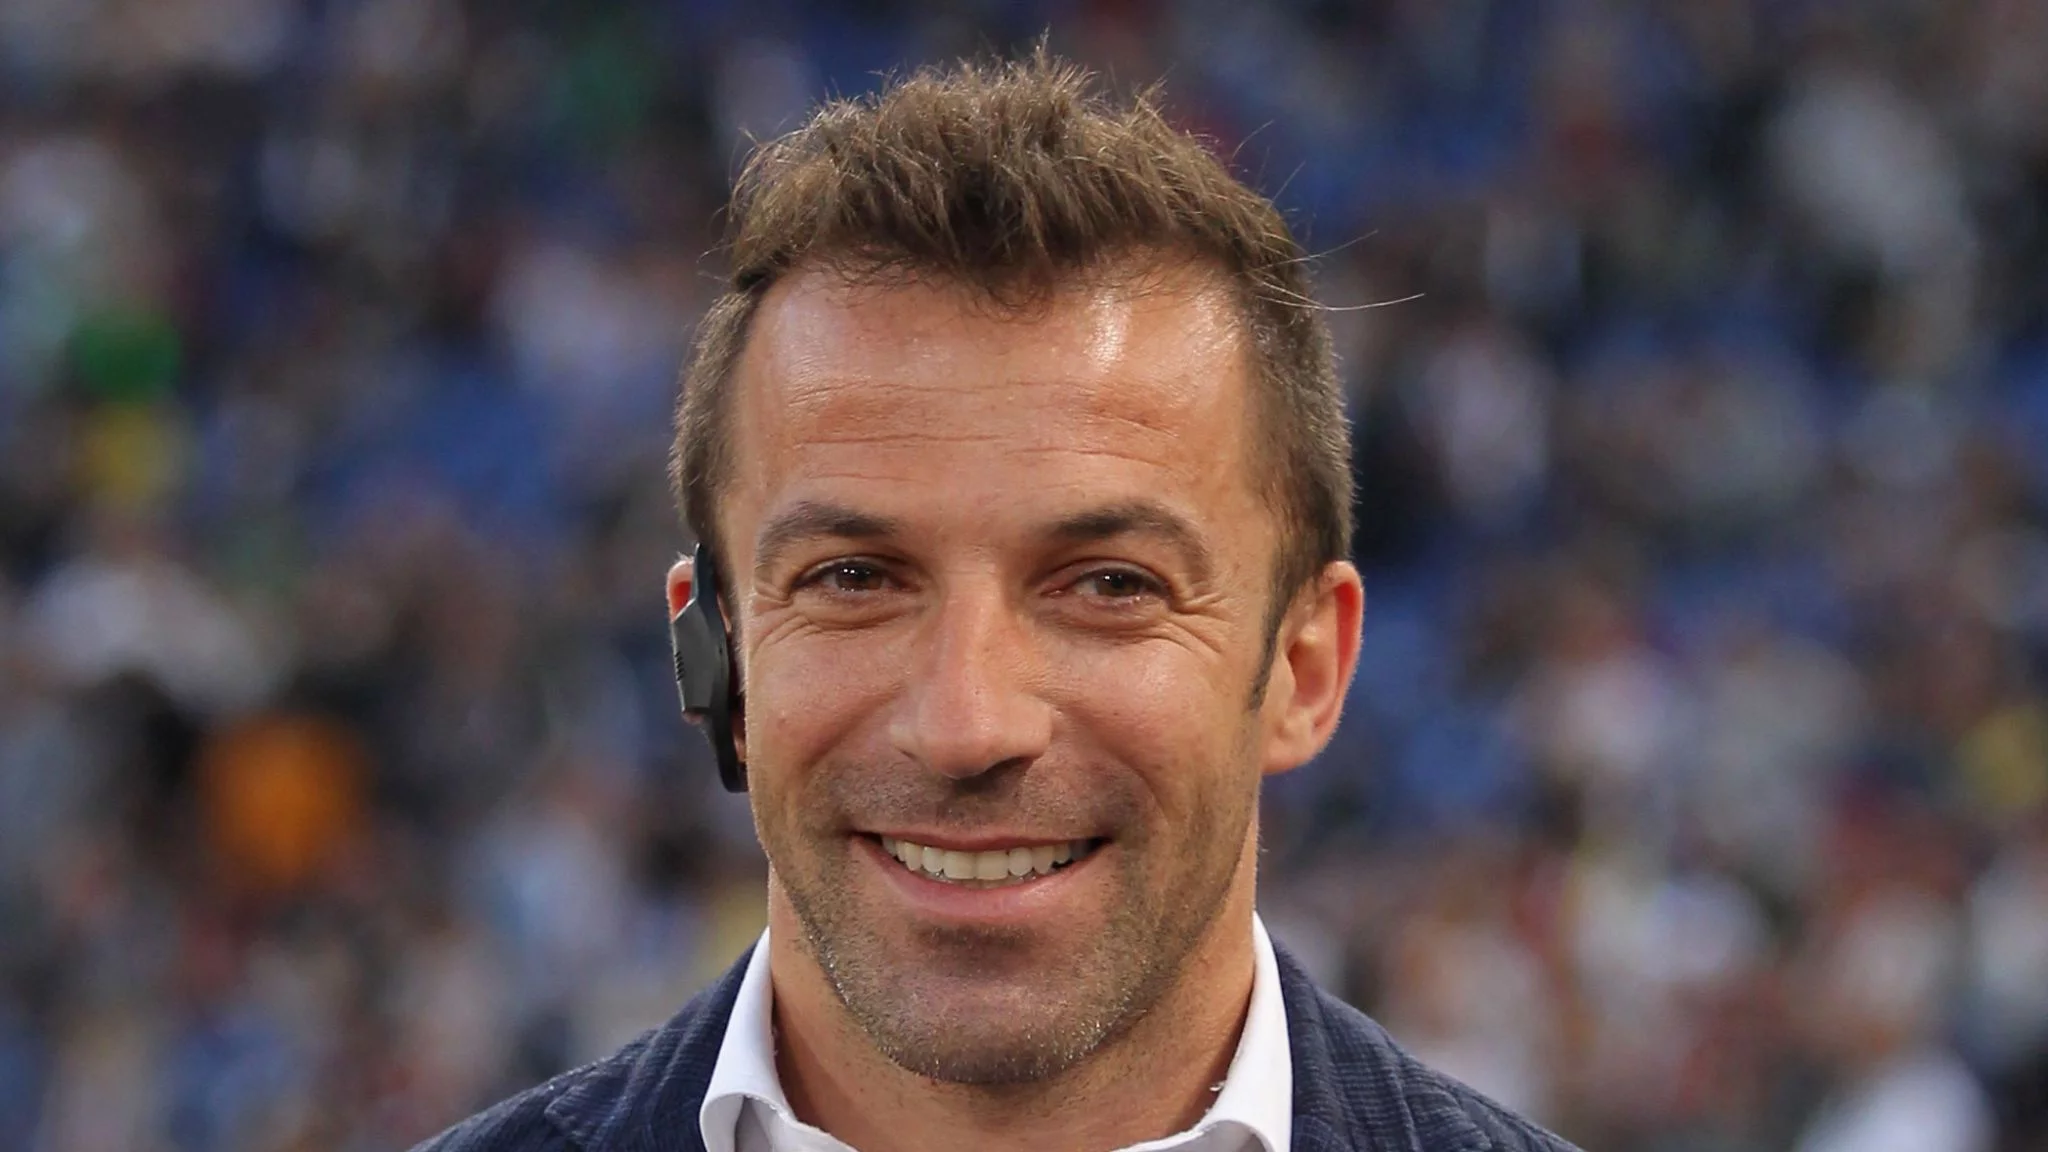  World Cup 2022: Del Piero names two favourites countries to win tournament in Qatar